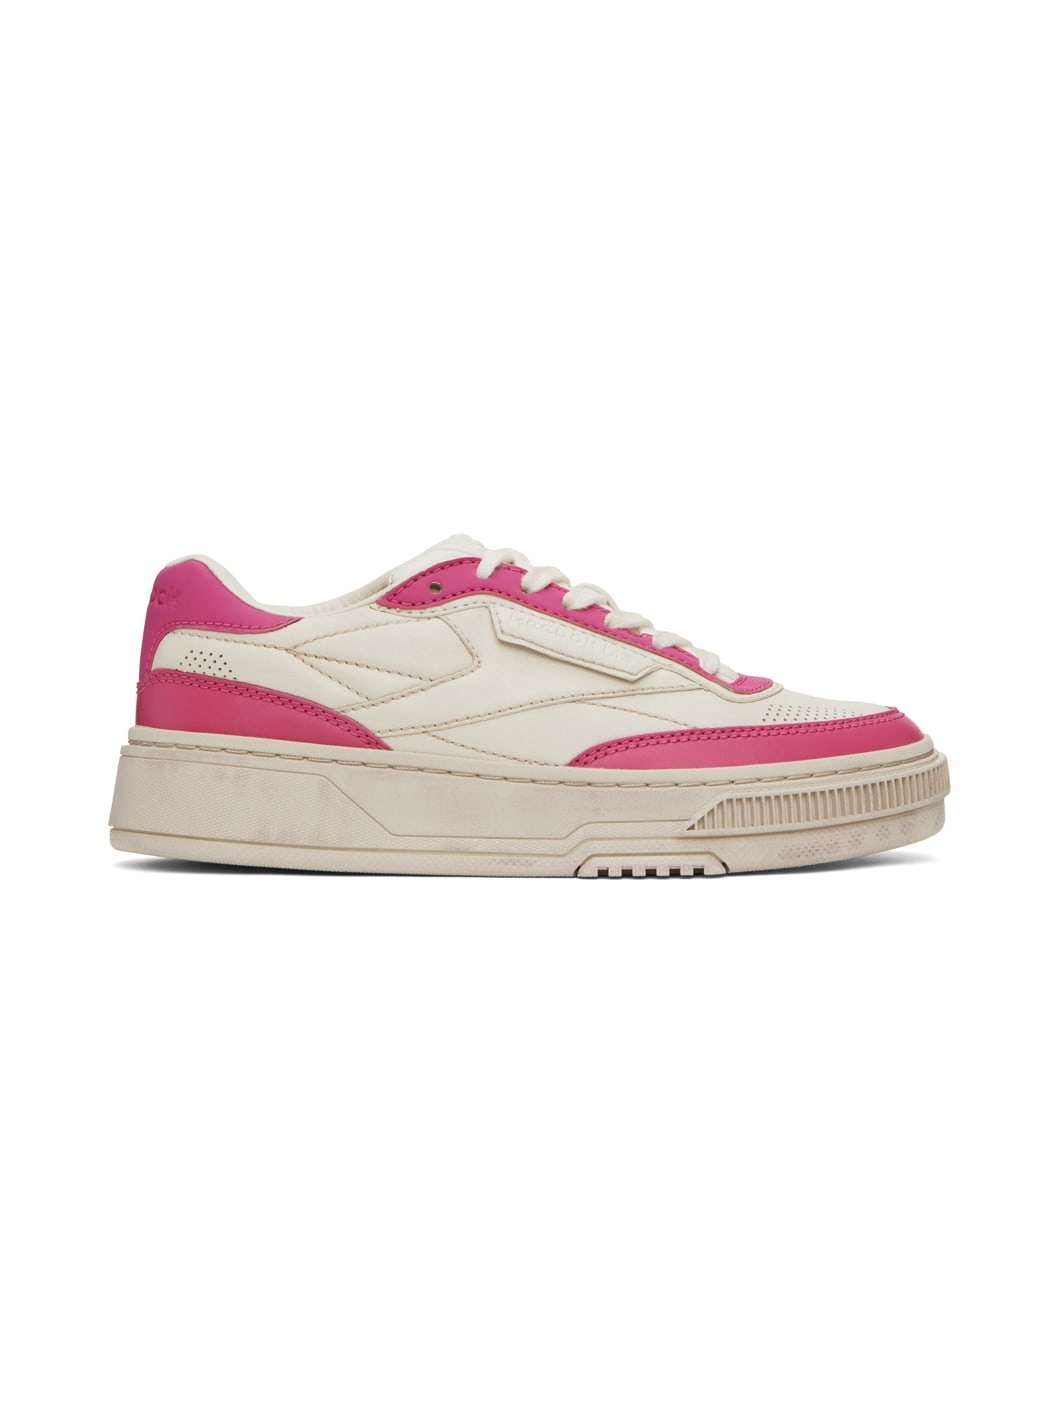 Off-White & Pink Club C LTD Sneakers - 1